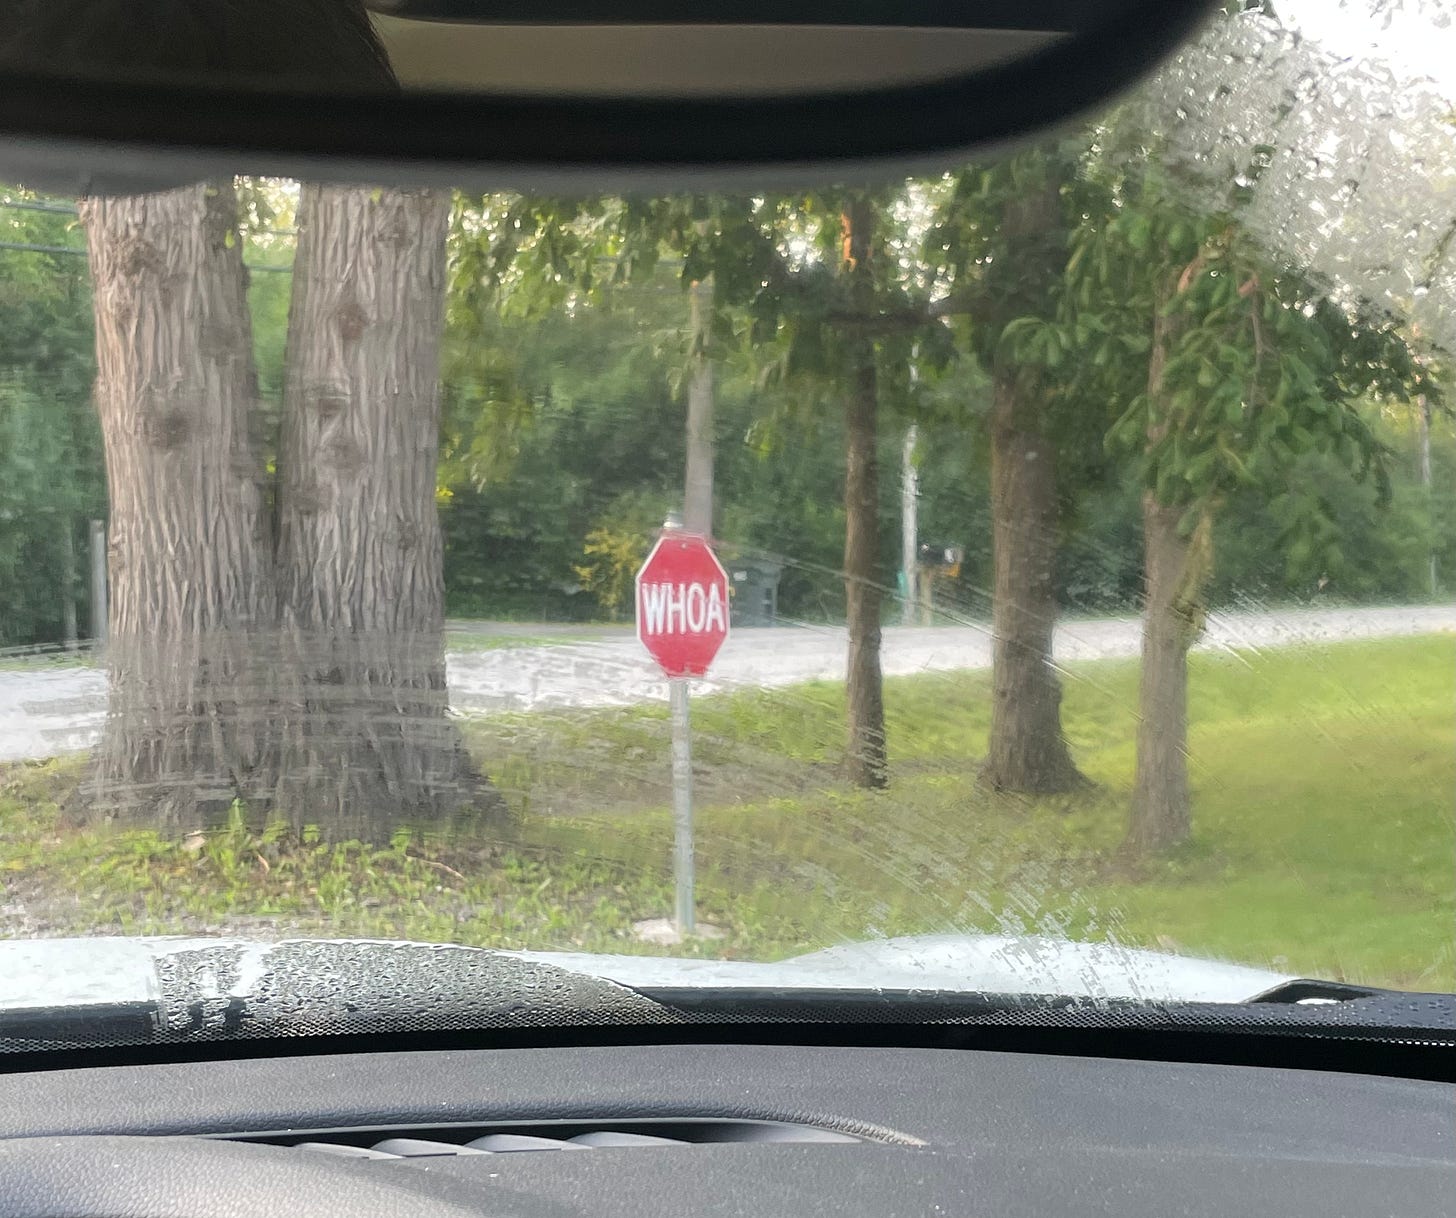 Photograph of a stop sign that says "WHOA"